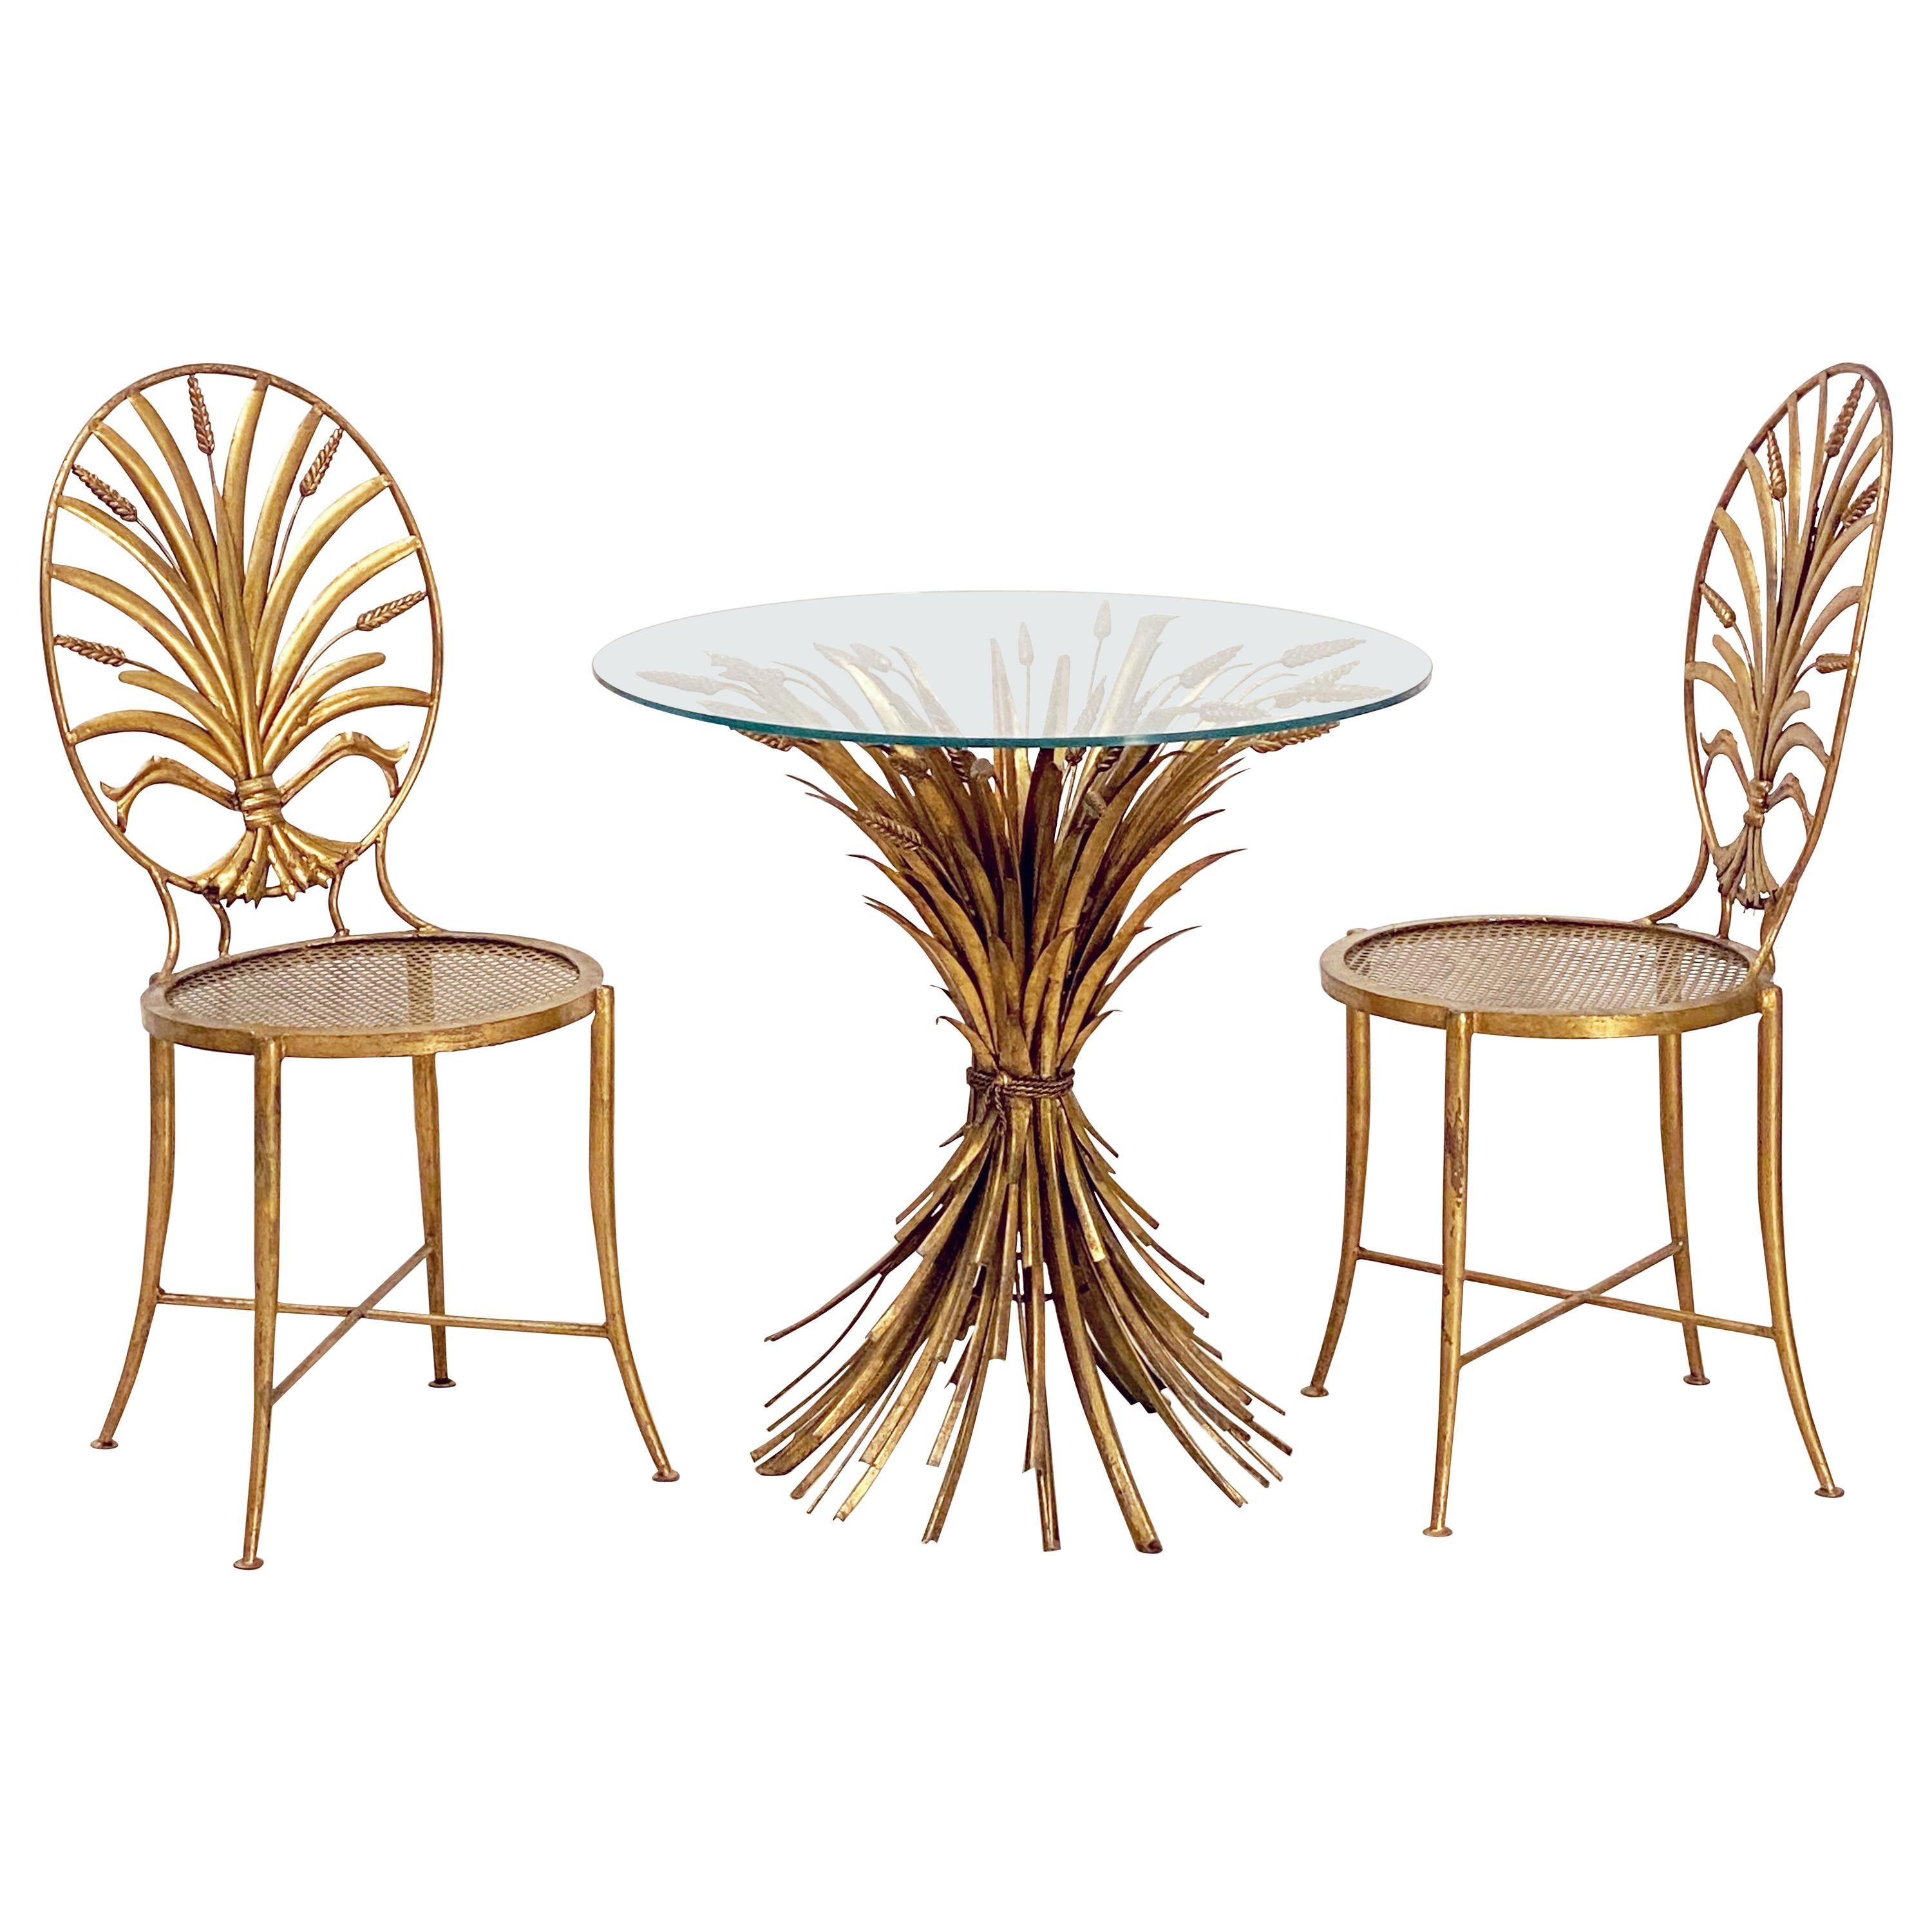 Italian Wheat Sheaf Cocktail Table and Chairs Set by S. Salvadori, Firenze